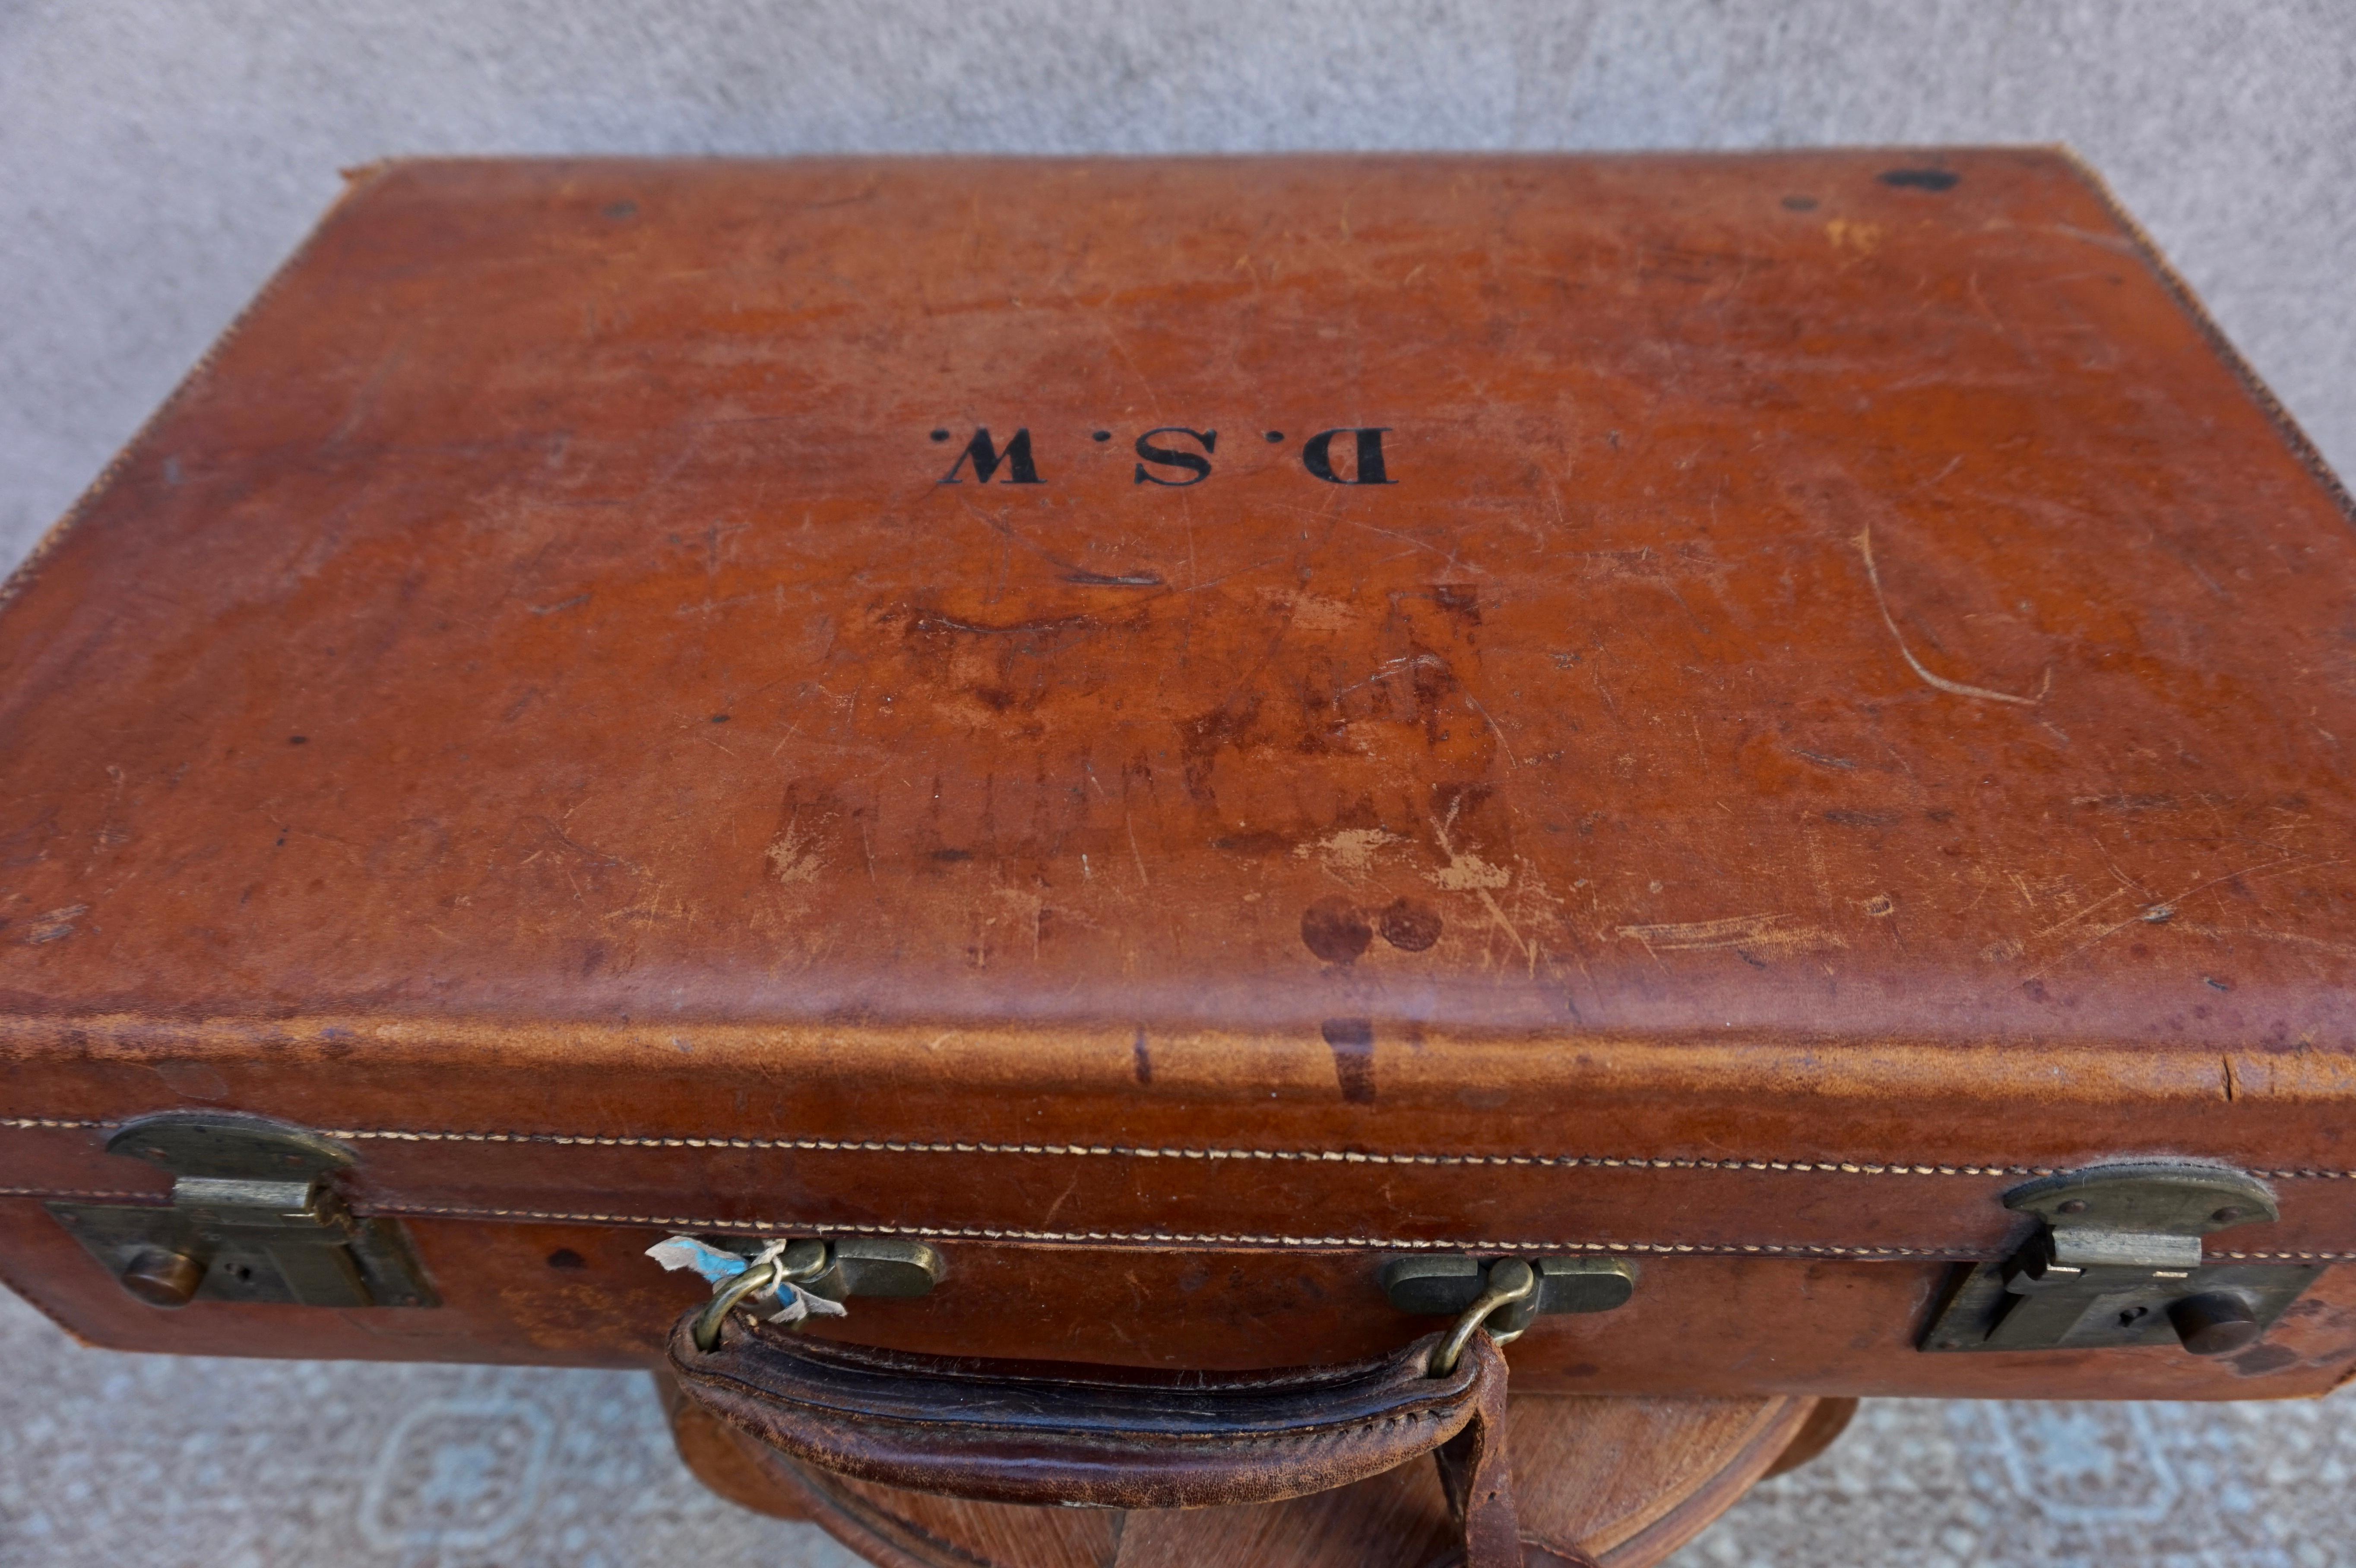 Very Rare British briefcase with initials DSW. Possibly belonging to Douglas S. Warren (on name tag) who was a Canadian Air Force pilot in WW2 and Commanding Officer in the RAF later when he spent time in England in the early 50's. In original